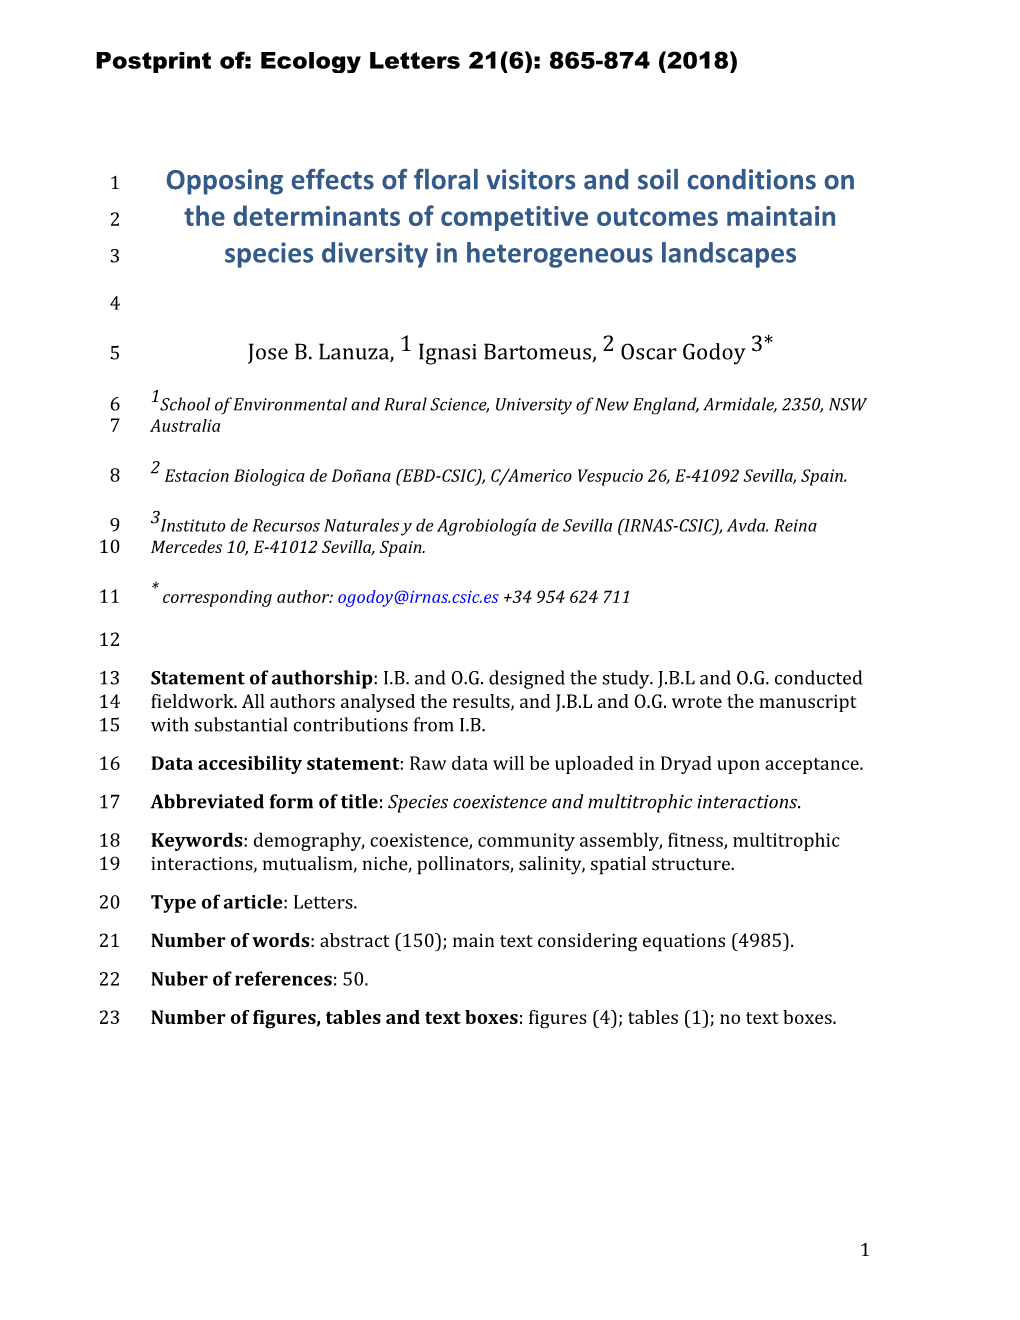 Opposing Effects of Floral Visitors and Soil Conditions on the Determinants